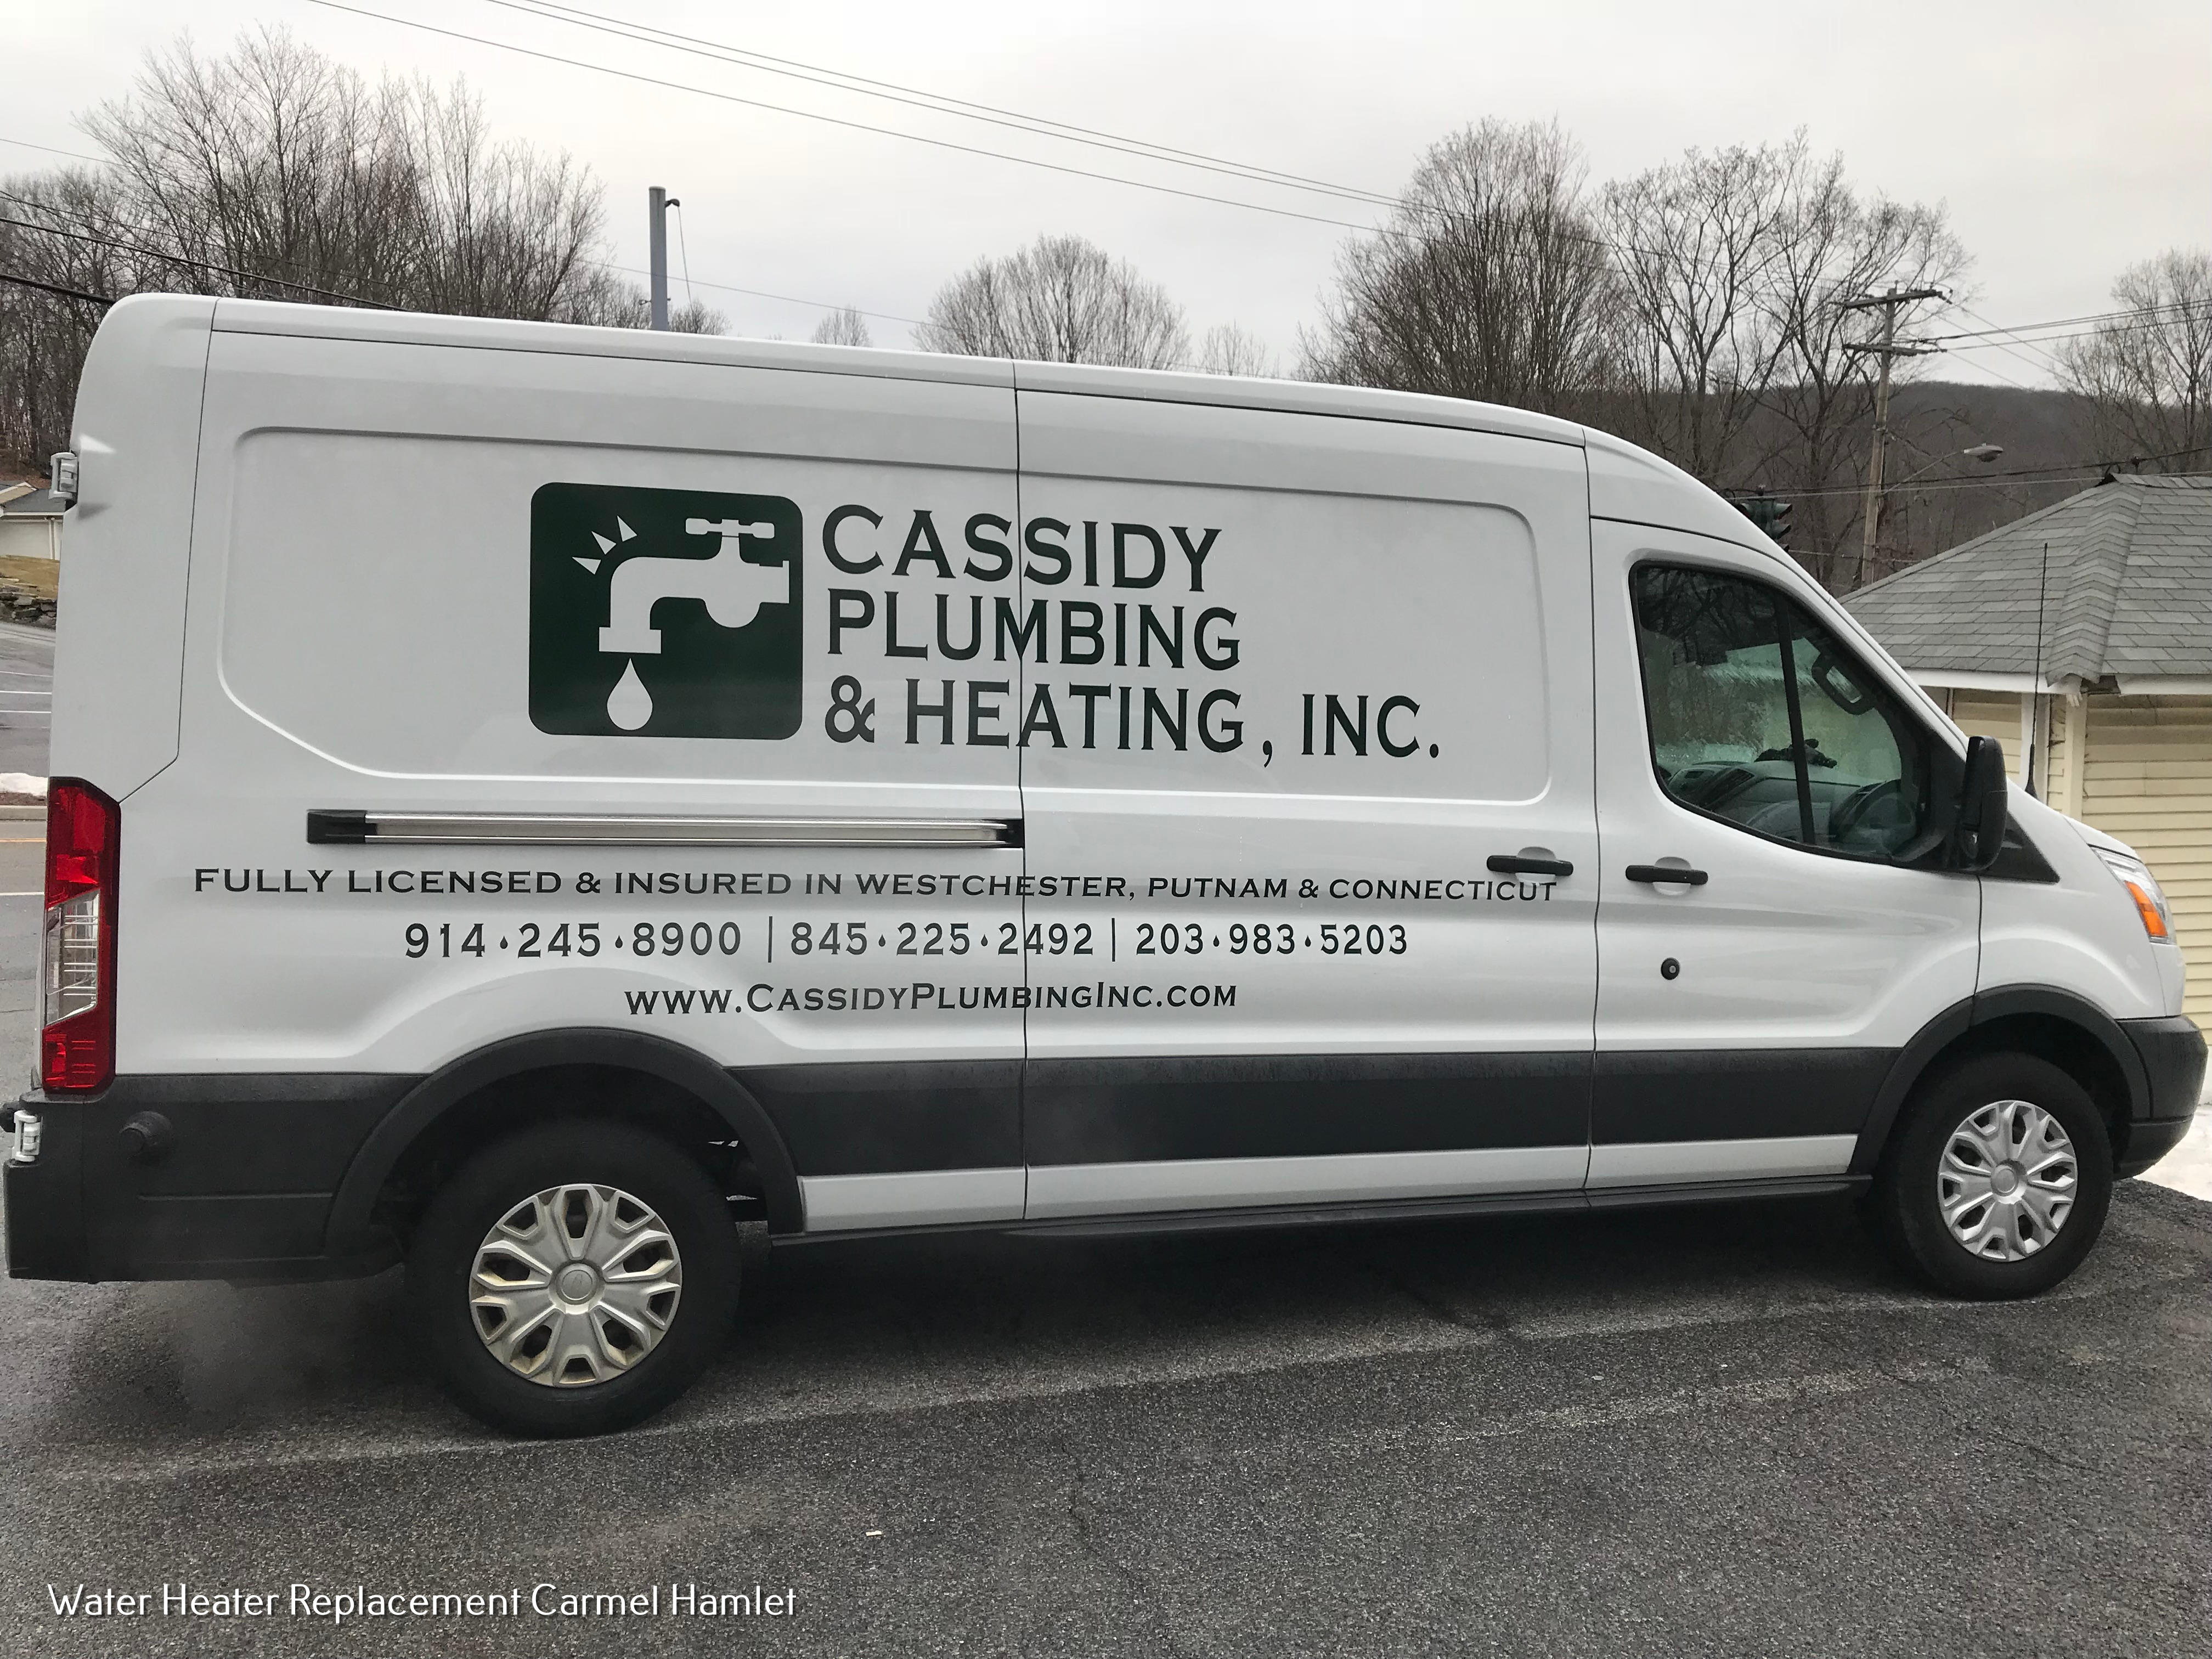 Get Exceptional Plumbing and Heating Services with Cassidy Plumbing Inc 